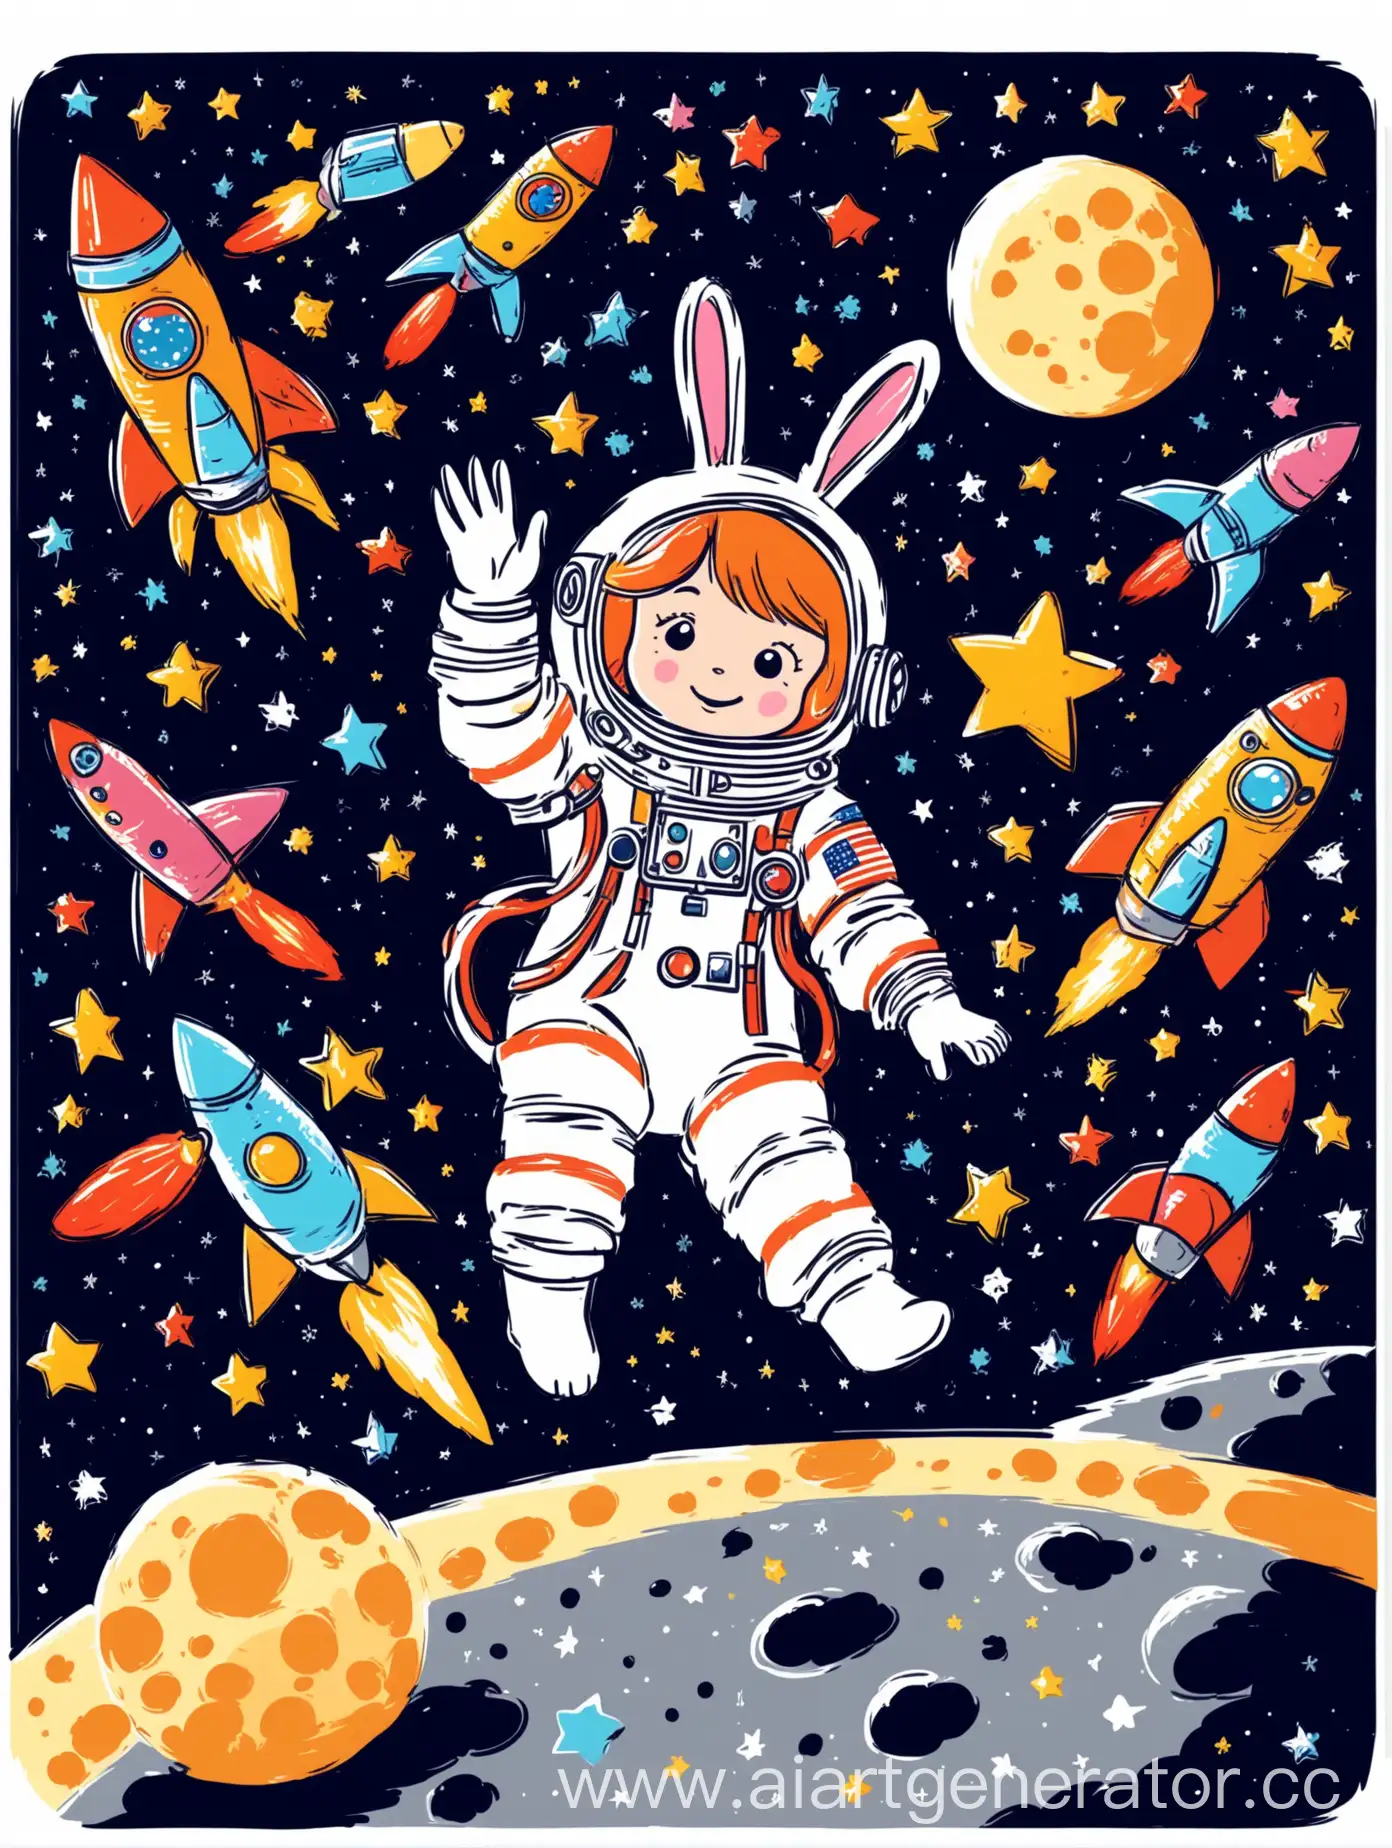 CosmonautHare-Drawing-Starlets-on-the-Moon-with-Childrens-Rockets-in-Vector-Style